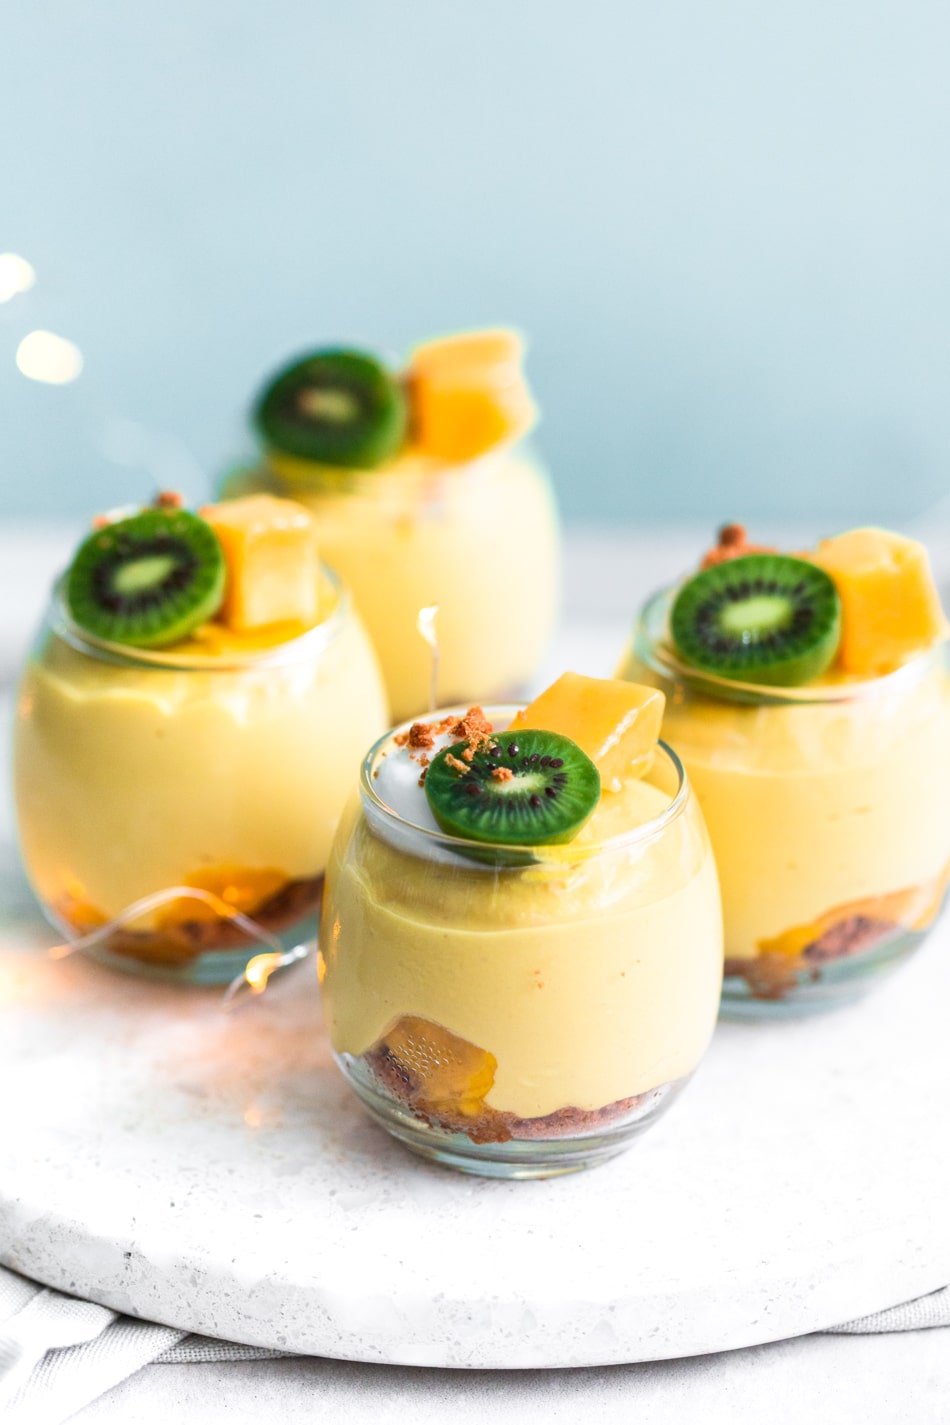 A delicious and fresh No-Bake Vegan Mango Cheesecake that tastes like summer in a cup. Refined Sugar Free, Dairy-Free and simple to make. #vegan #mango #cheesecake #dessert #dairyfree #mangocream #pudding #vegancheesecake #veganmangodesserts #dessert #crueltyfree #simple #vitamix 